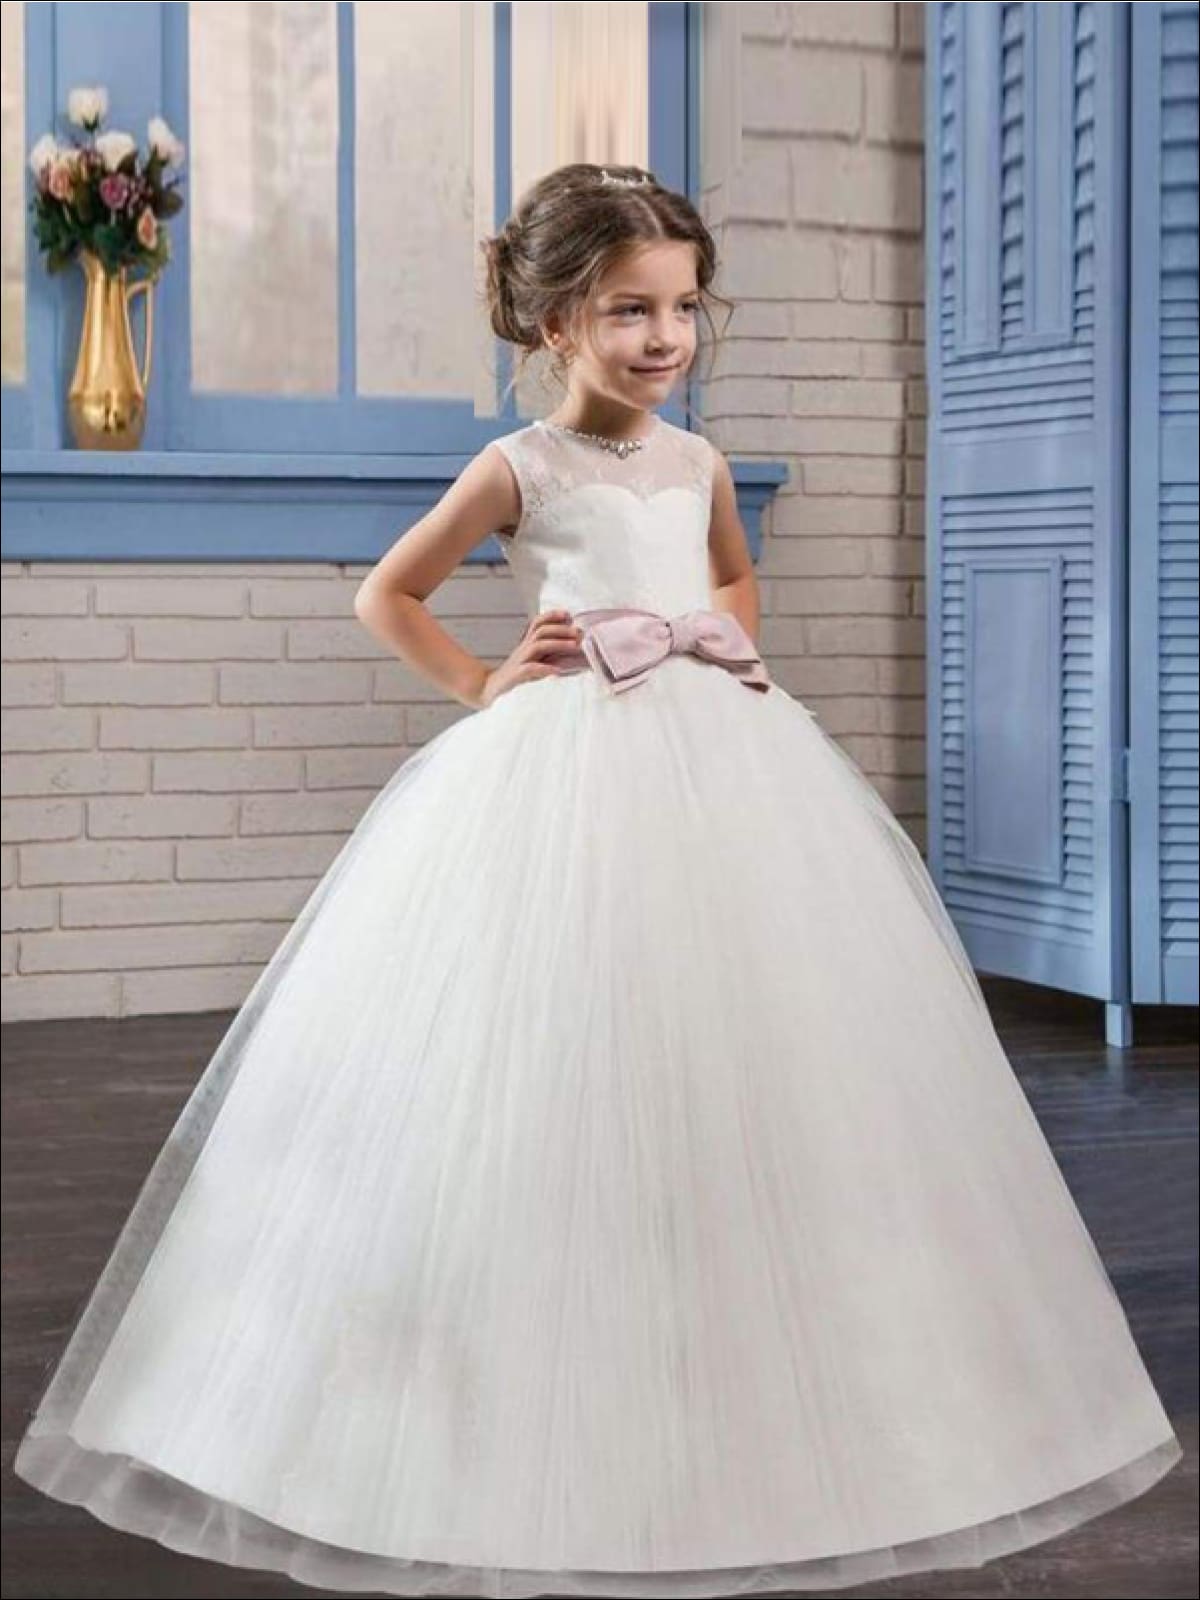 https://cdn.shopify.com/s/files/1/0996/1812/products/girls-white-sleeveless-floral-lace-pearl-rhinestone-bow-communion-flower-girl-party-dress-20-39-99-40-59-10y12y-6x6y-7y8y-gown-mia-belle-overseas-fulfillment_587.jpg